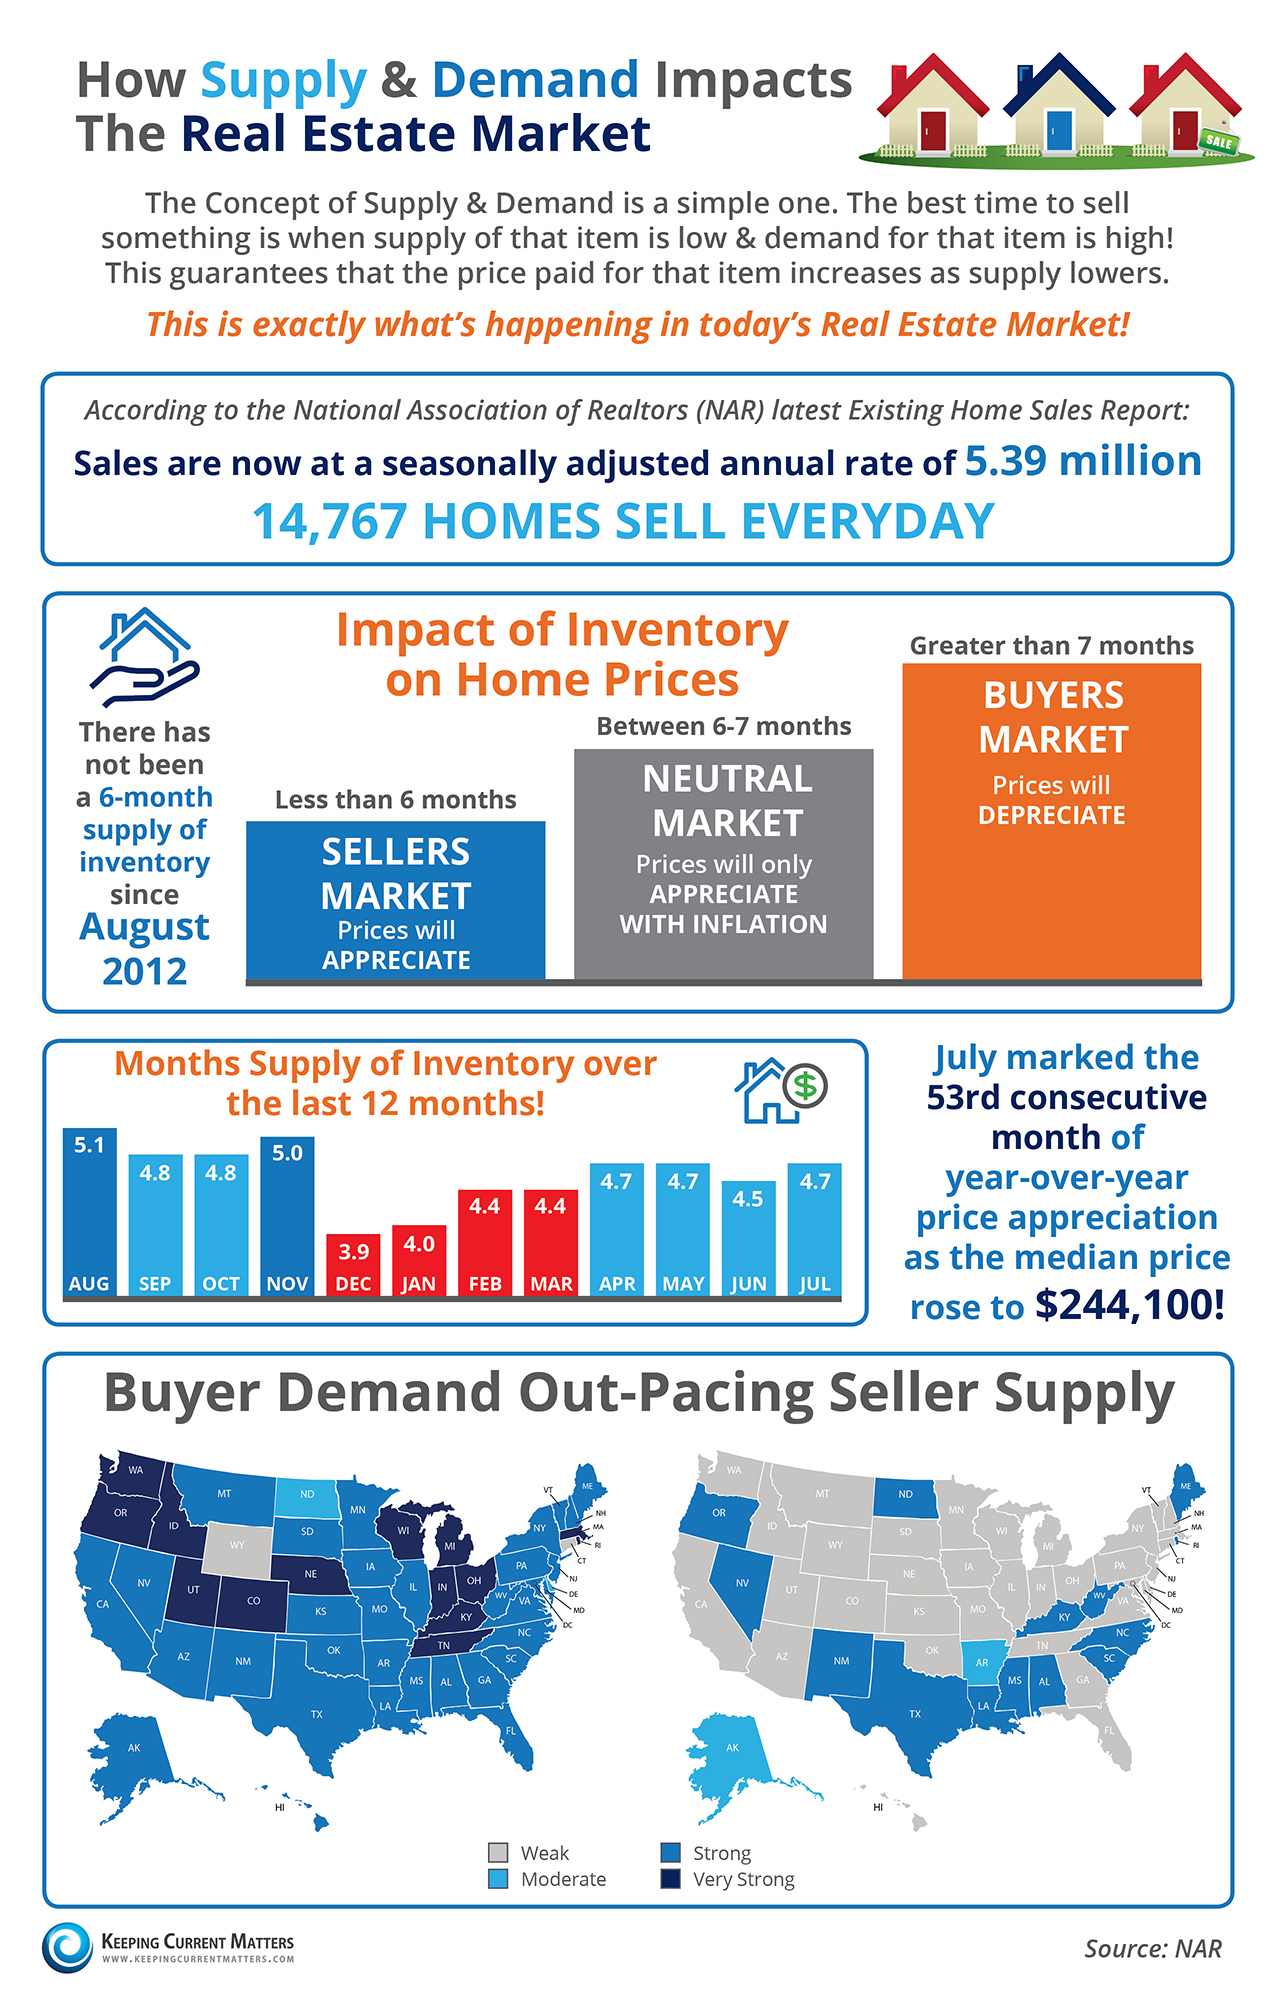 How To Make An Infographic On Supply And Demand